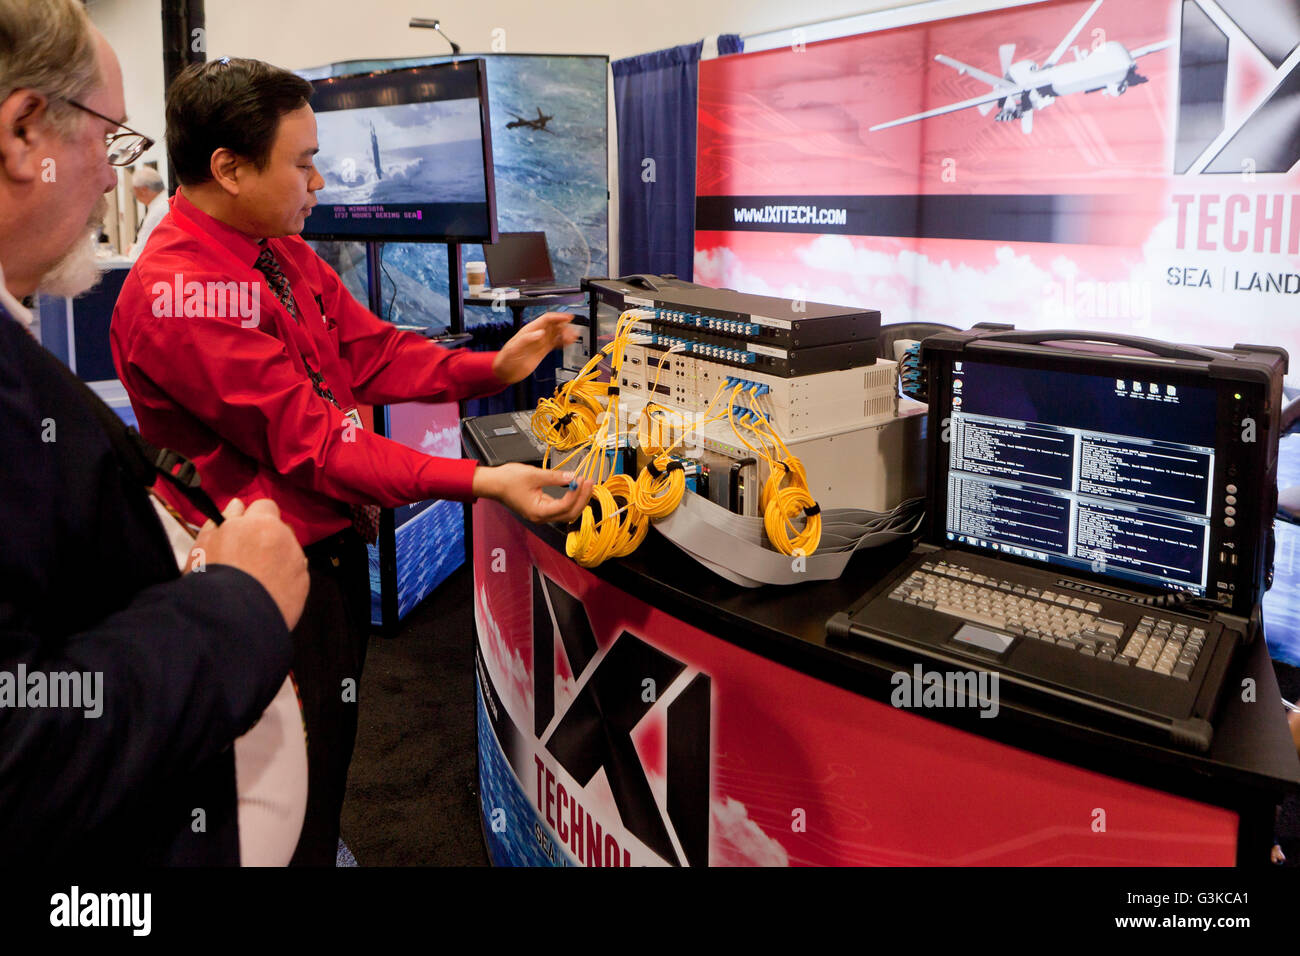 Technician demonstrating military use communications servers at an expo - USA Stock Photo